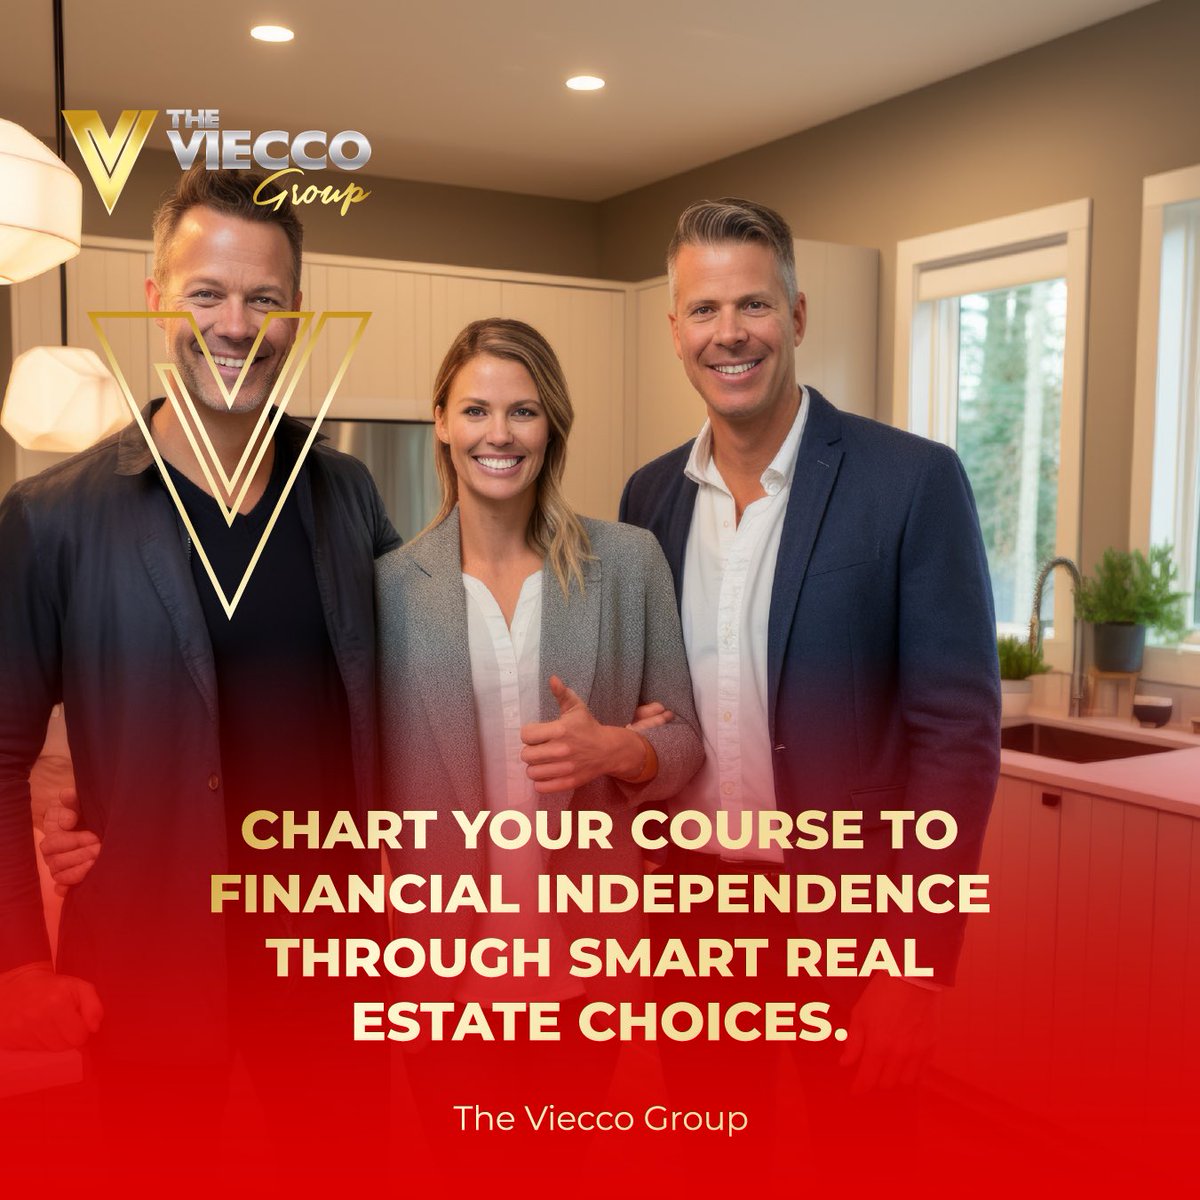 At The VIECCO Group Always Helping our Communities to Build Wealth through Homeownership!!!!!

#thevieccogroup #makingthingshappen #successstory #thenewbanking #construyendoriqueza #buildingwealth #entrepreneur #entrepreneurship #luxury #topproducer #mortgages #sales #business…